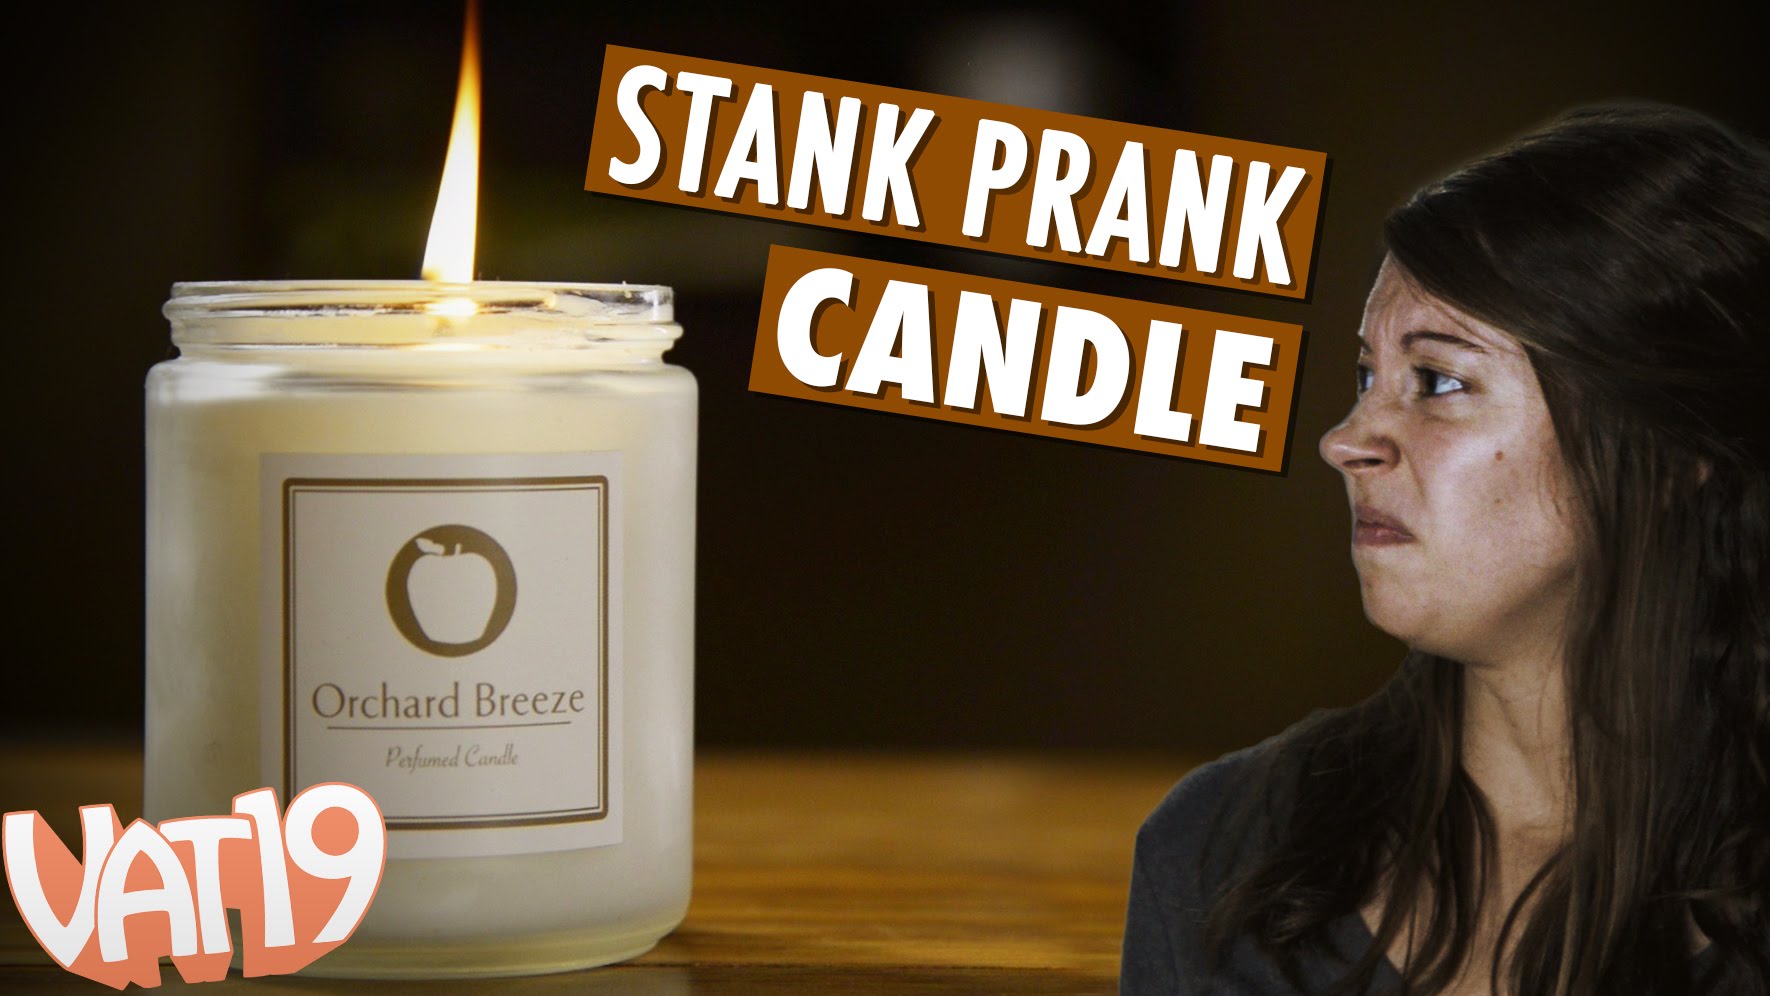 A prank candle company
This business is unique. It helps you in getting scented candles with a twist. Initially, the candle giving out a sweet aroma. However, the horror starts after some time when the foul smell fills the room. Want to buy some or start making of your own?